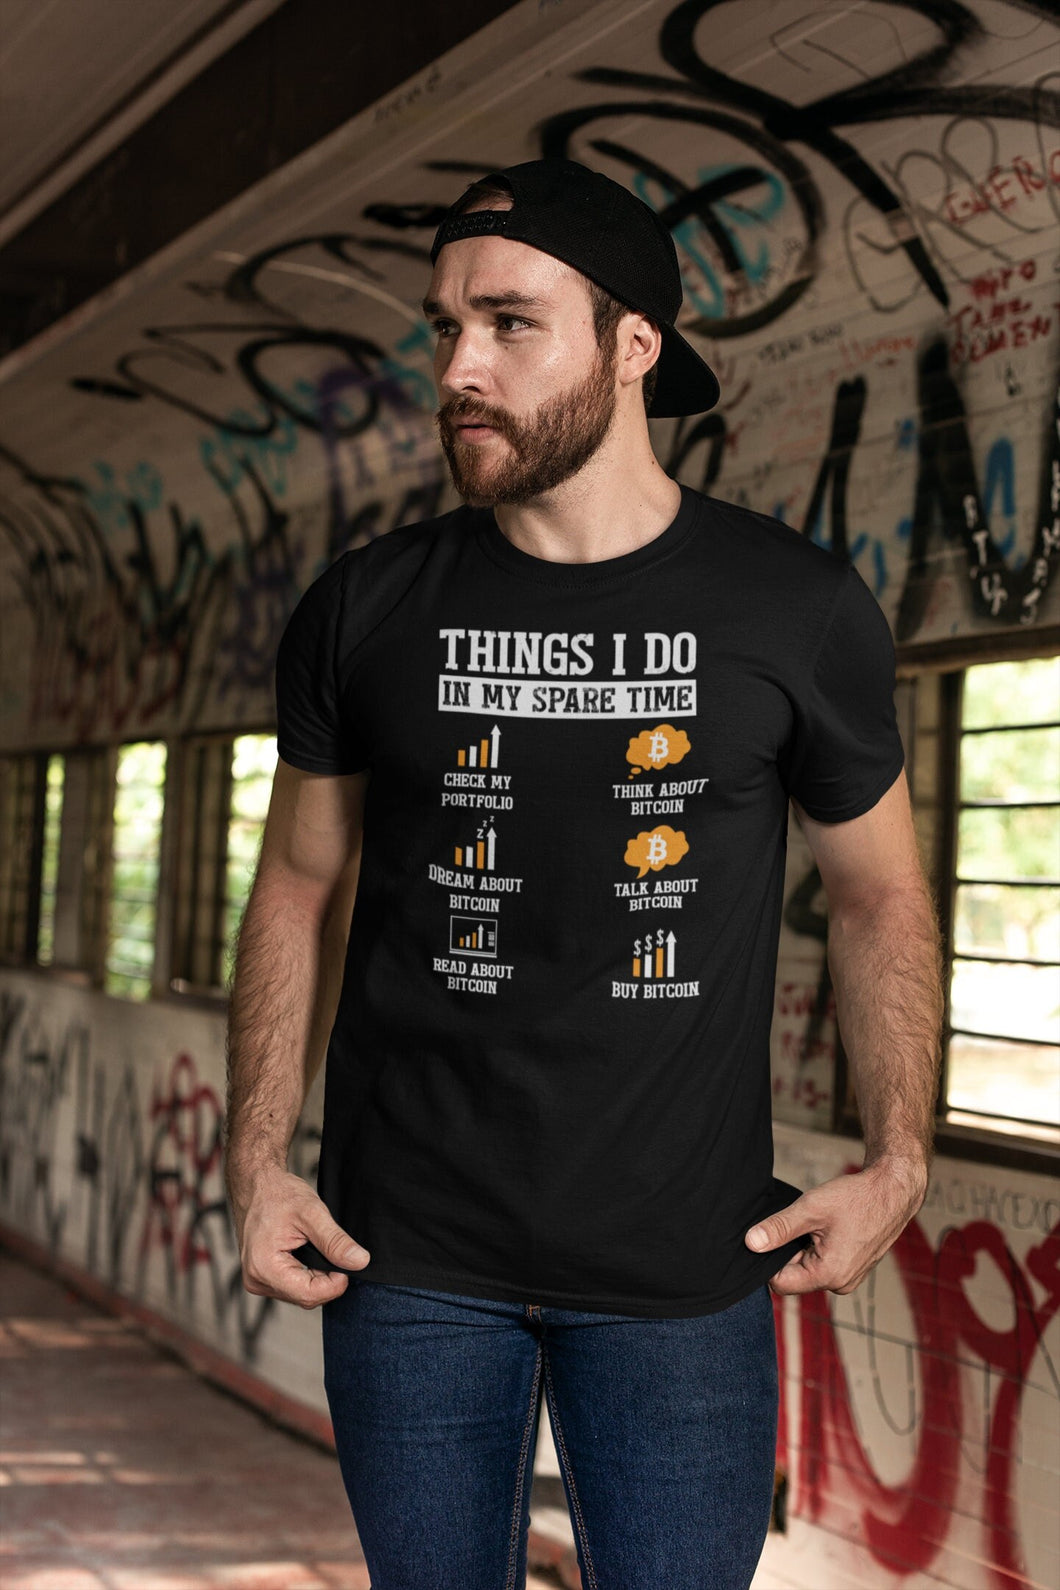 Things I Do In My Spare Time Bitcoin Shirt, Funny Crypto Investing Shirt, HODL Shirt, NFT Shirt